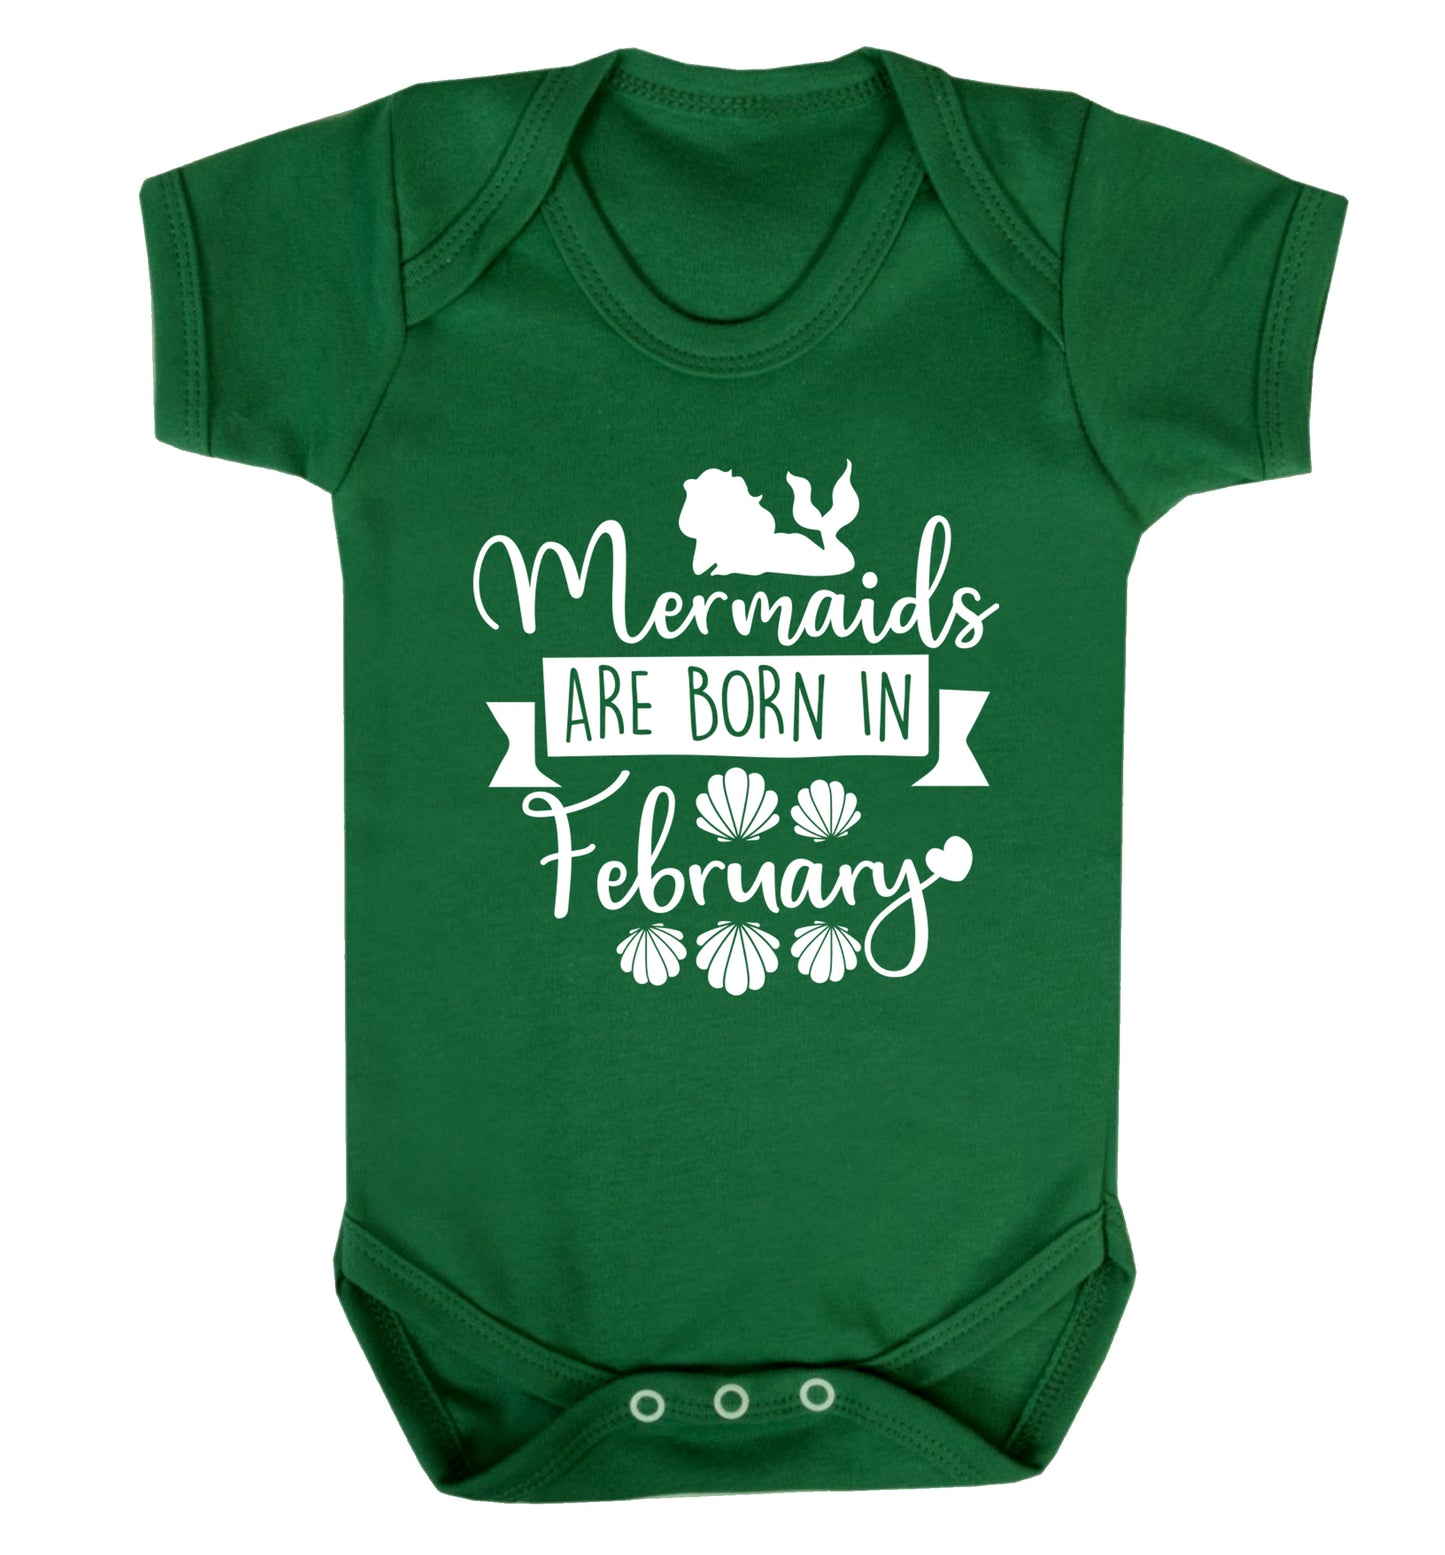 Mermaids are born in February Baby Vest green 18-24 months